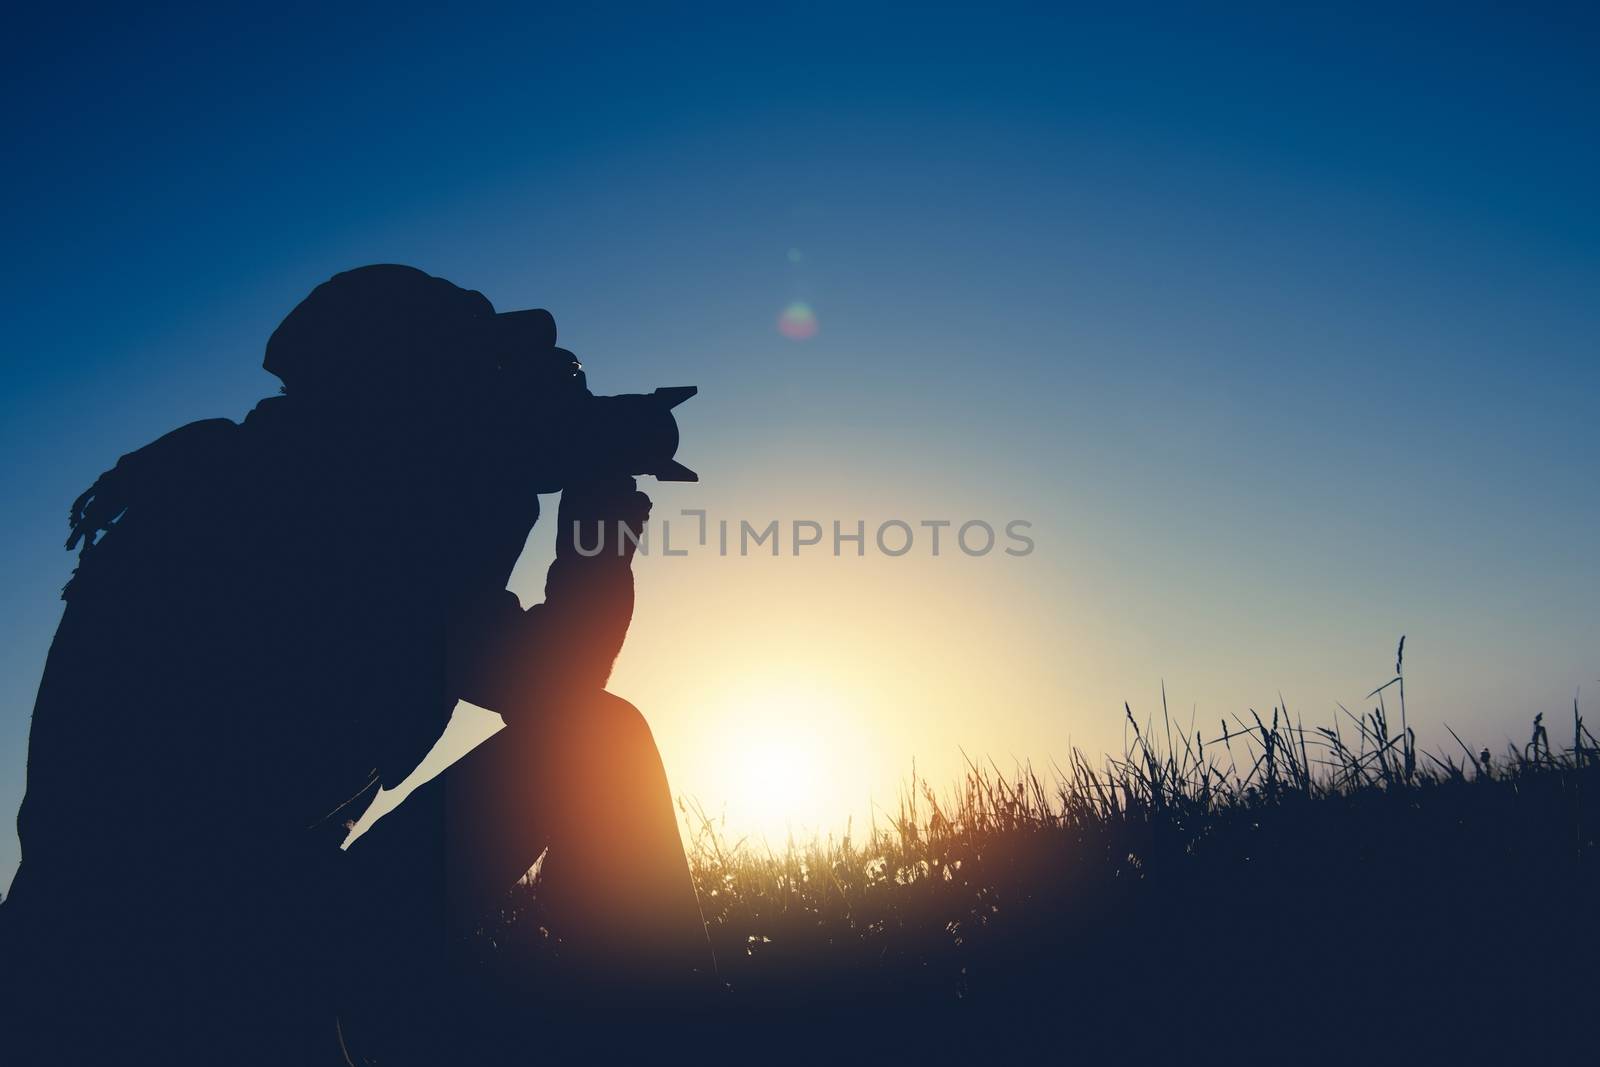 Dusk and Dawn Photography Theme. Men Taking Nature Pictures in the Remote Location.